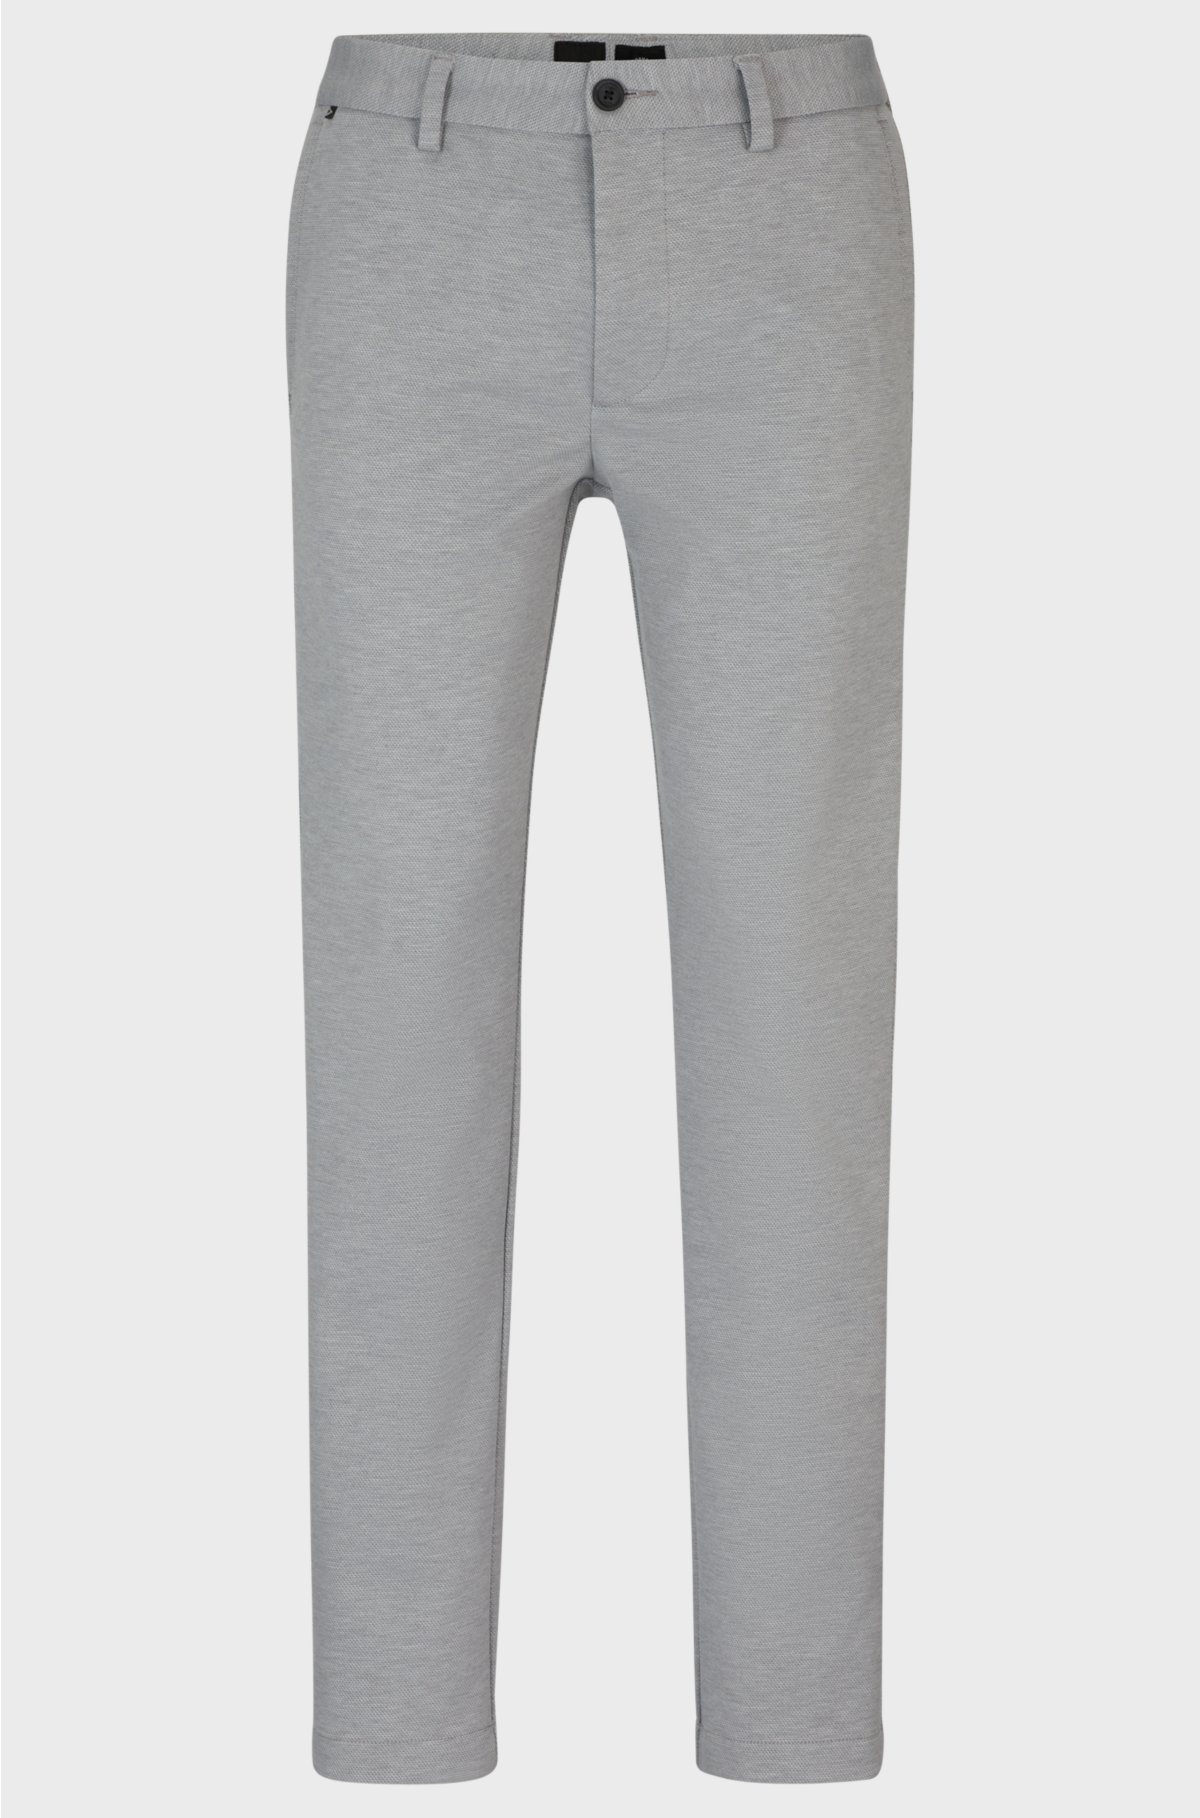 Slim-fit trousers in structured performance-stretch material, Silver